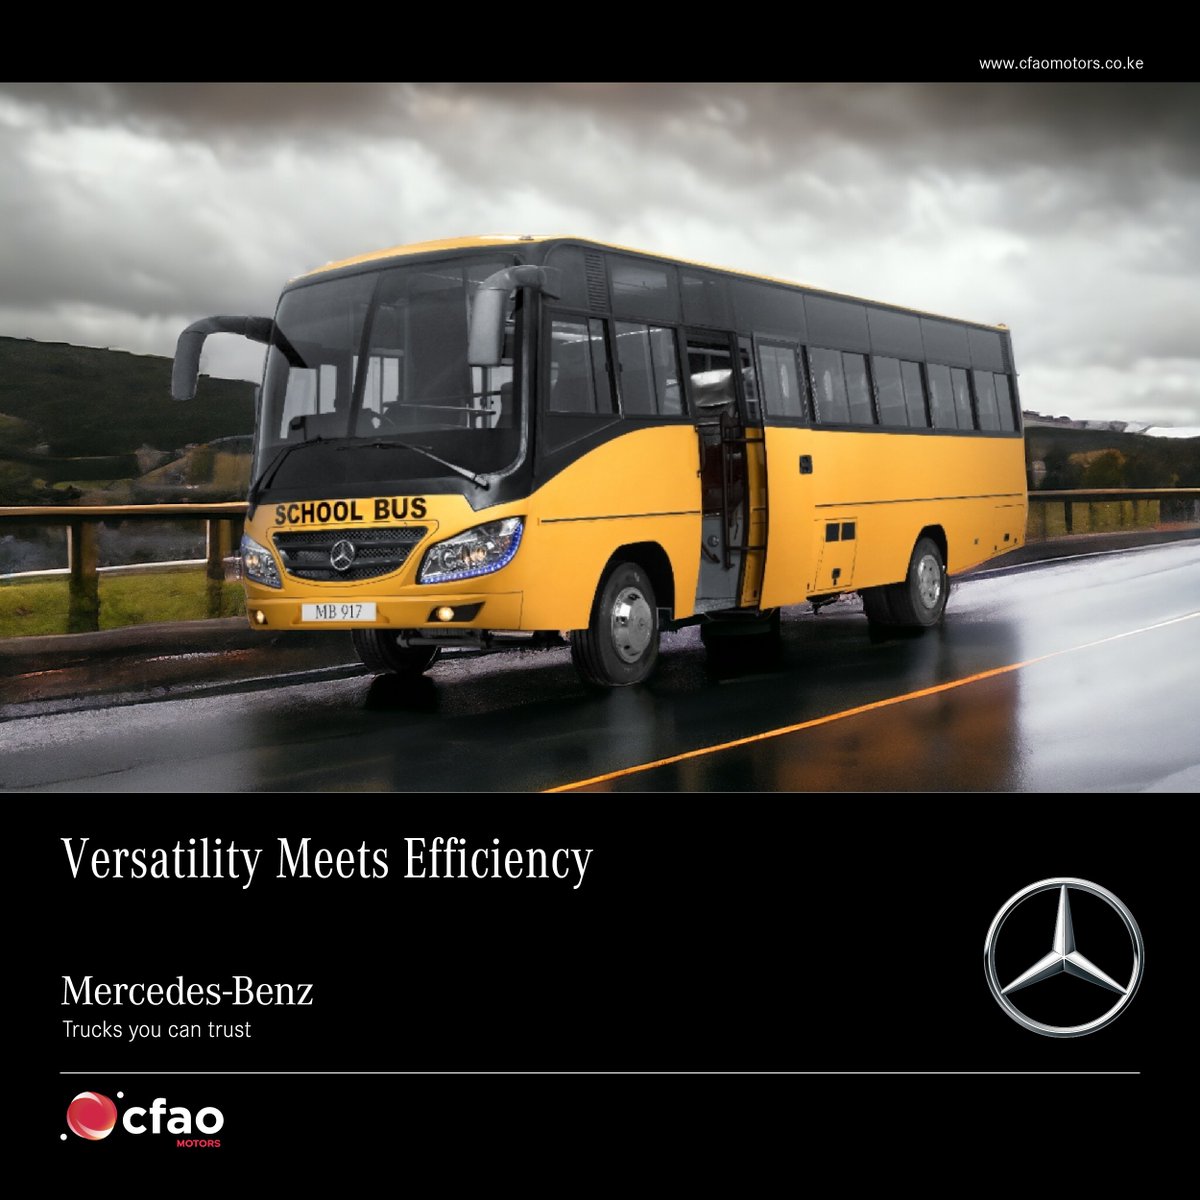 Experience the perfect blend of versatility and efficiency with the MB917. Designed to cater to a myriad of transport needs while ensuring cost-effectiveness. 

For more information call 0700766660, 0703222555 or WhatsApp 0110121032

 #CFAOMotorsDrivesKenya